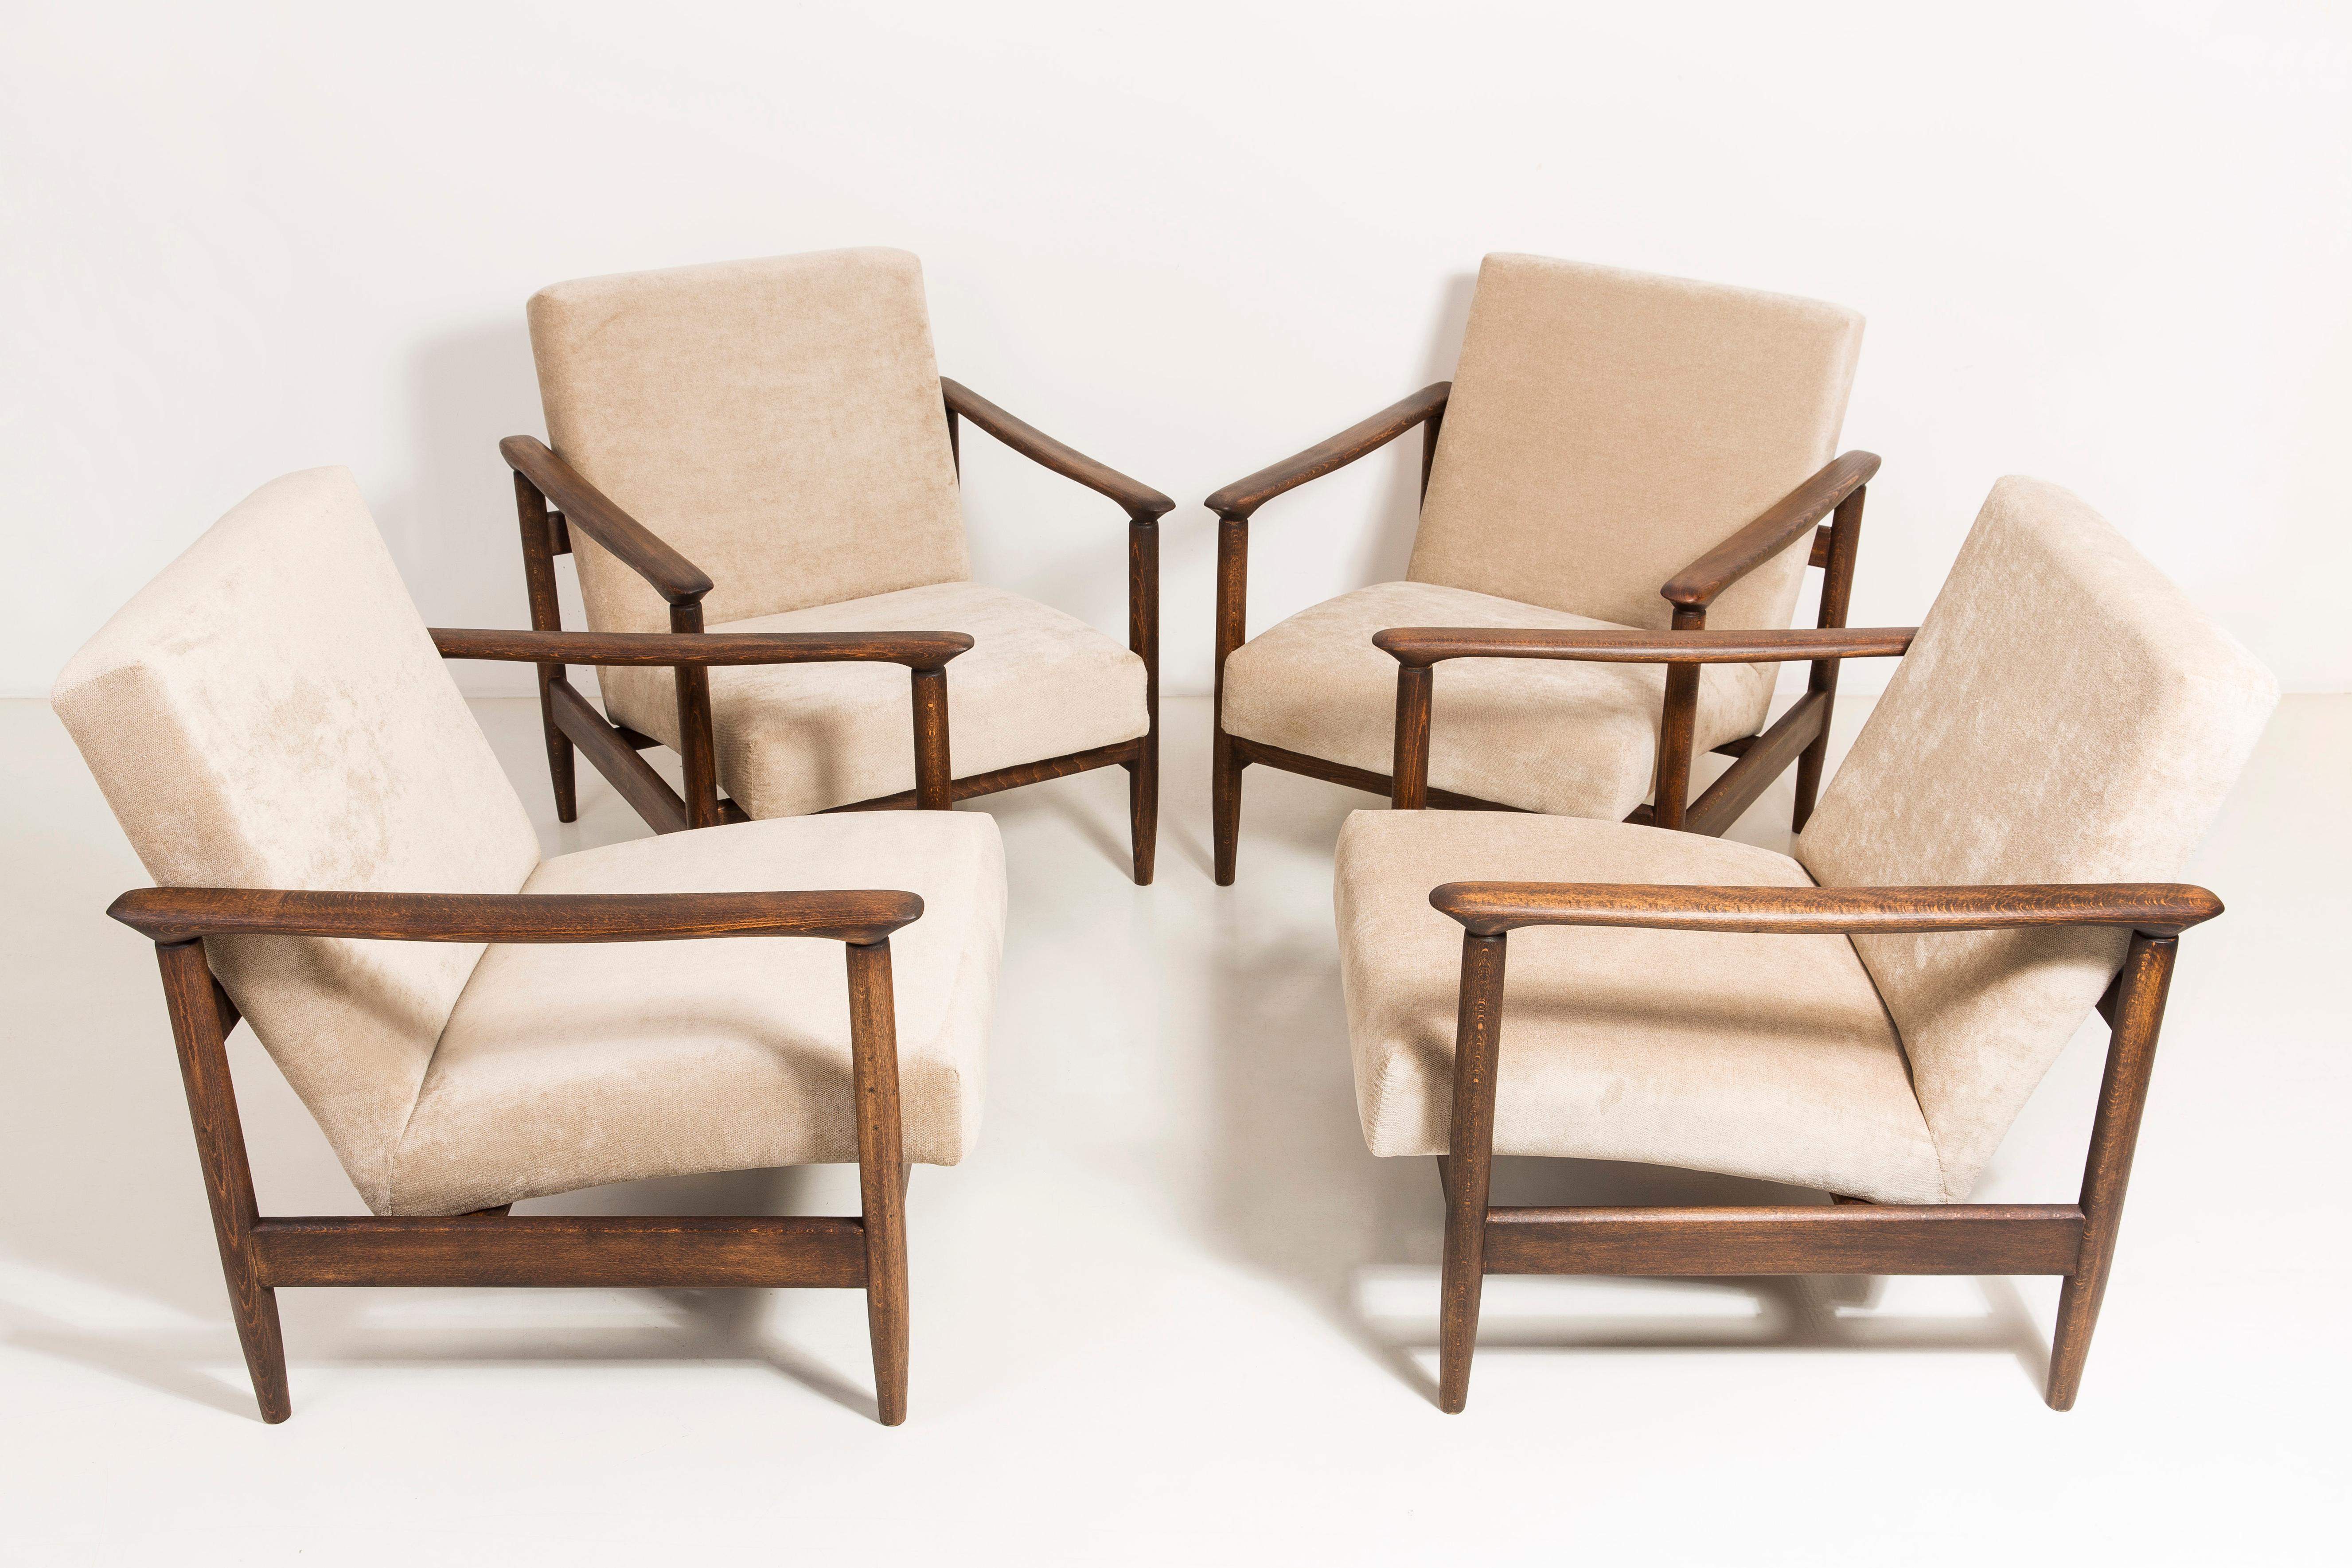 Set of four armchairs GFM-142, designed by Edmund Homa. The armchairs were made in the 1960s in the Gosciecinska Furniture Factory. They are made from solid beechwood. The GFM-142 armchair is regarded one of the best polish armchair design from the